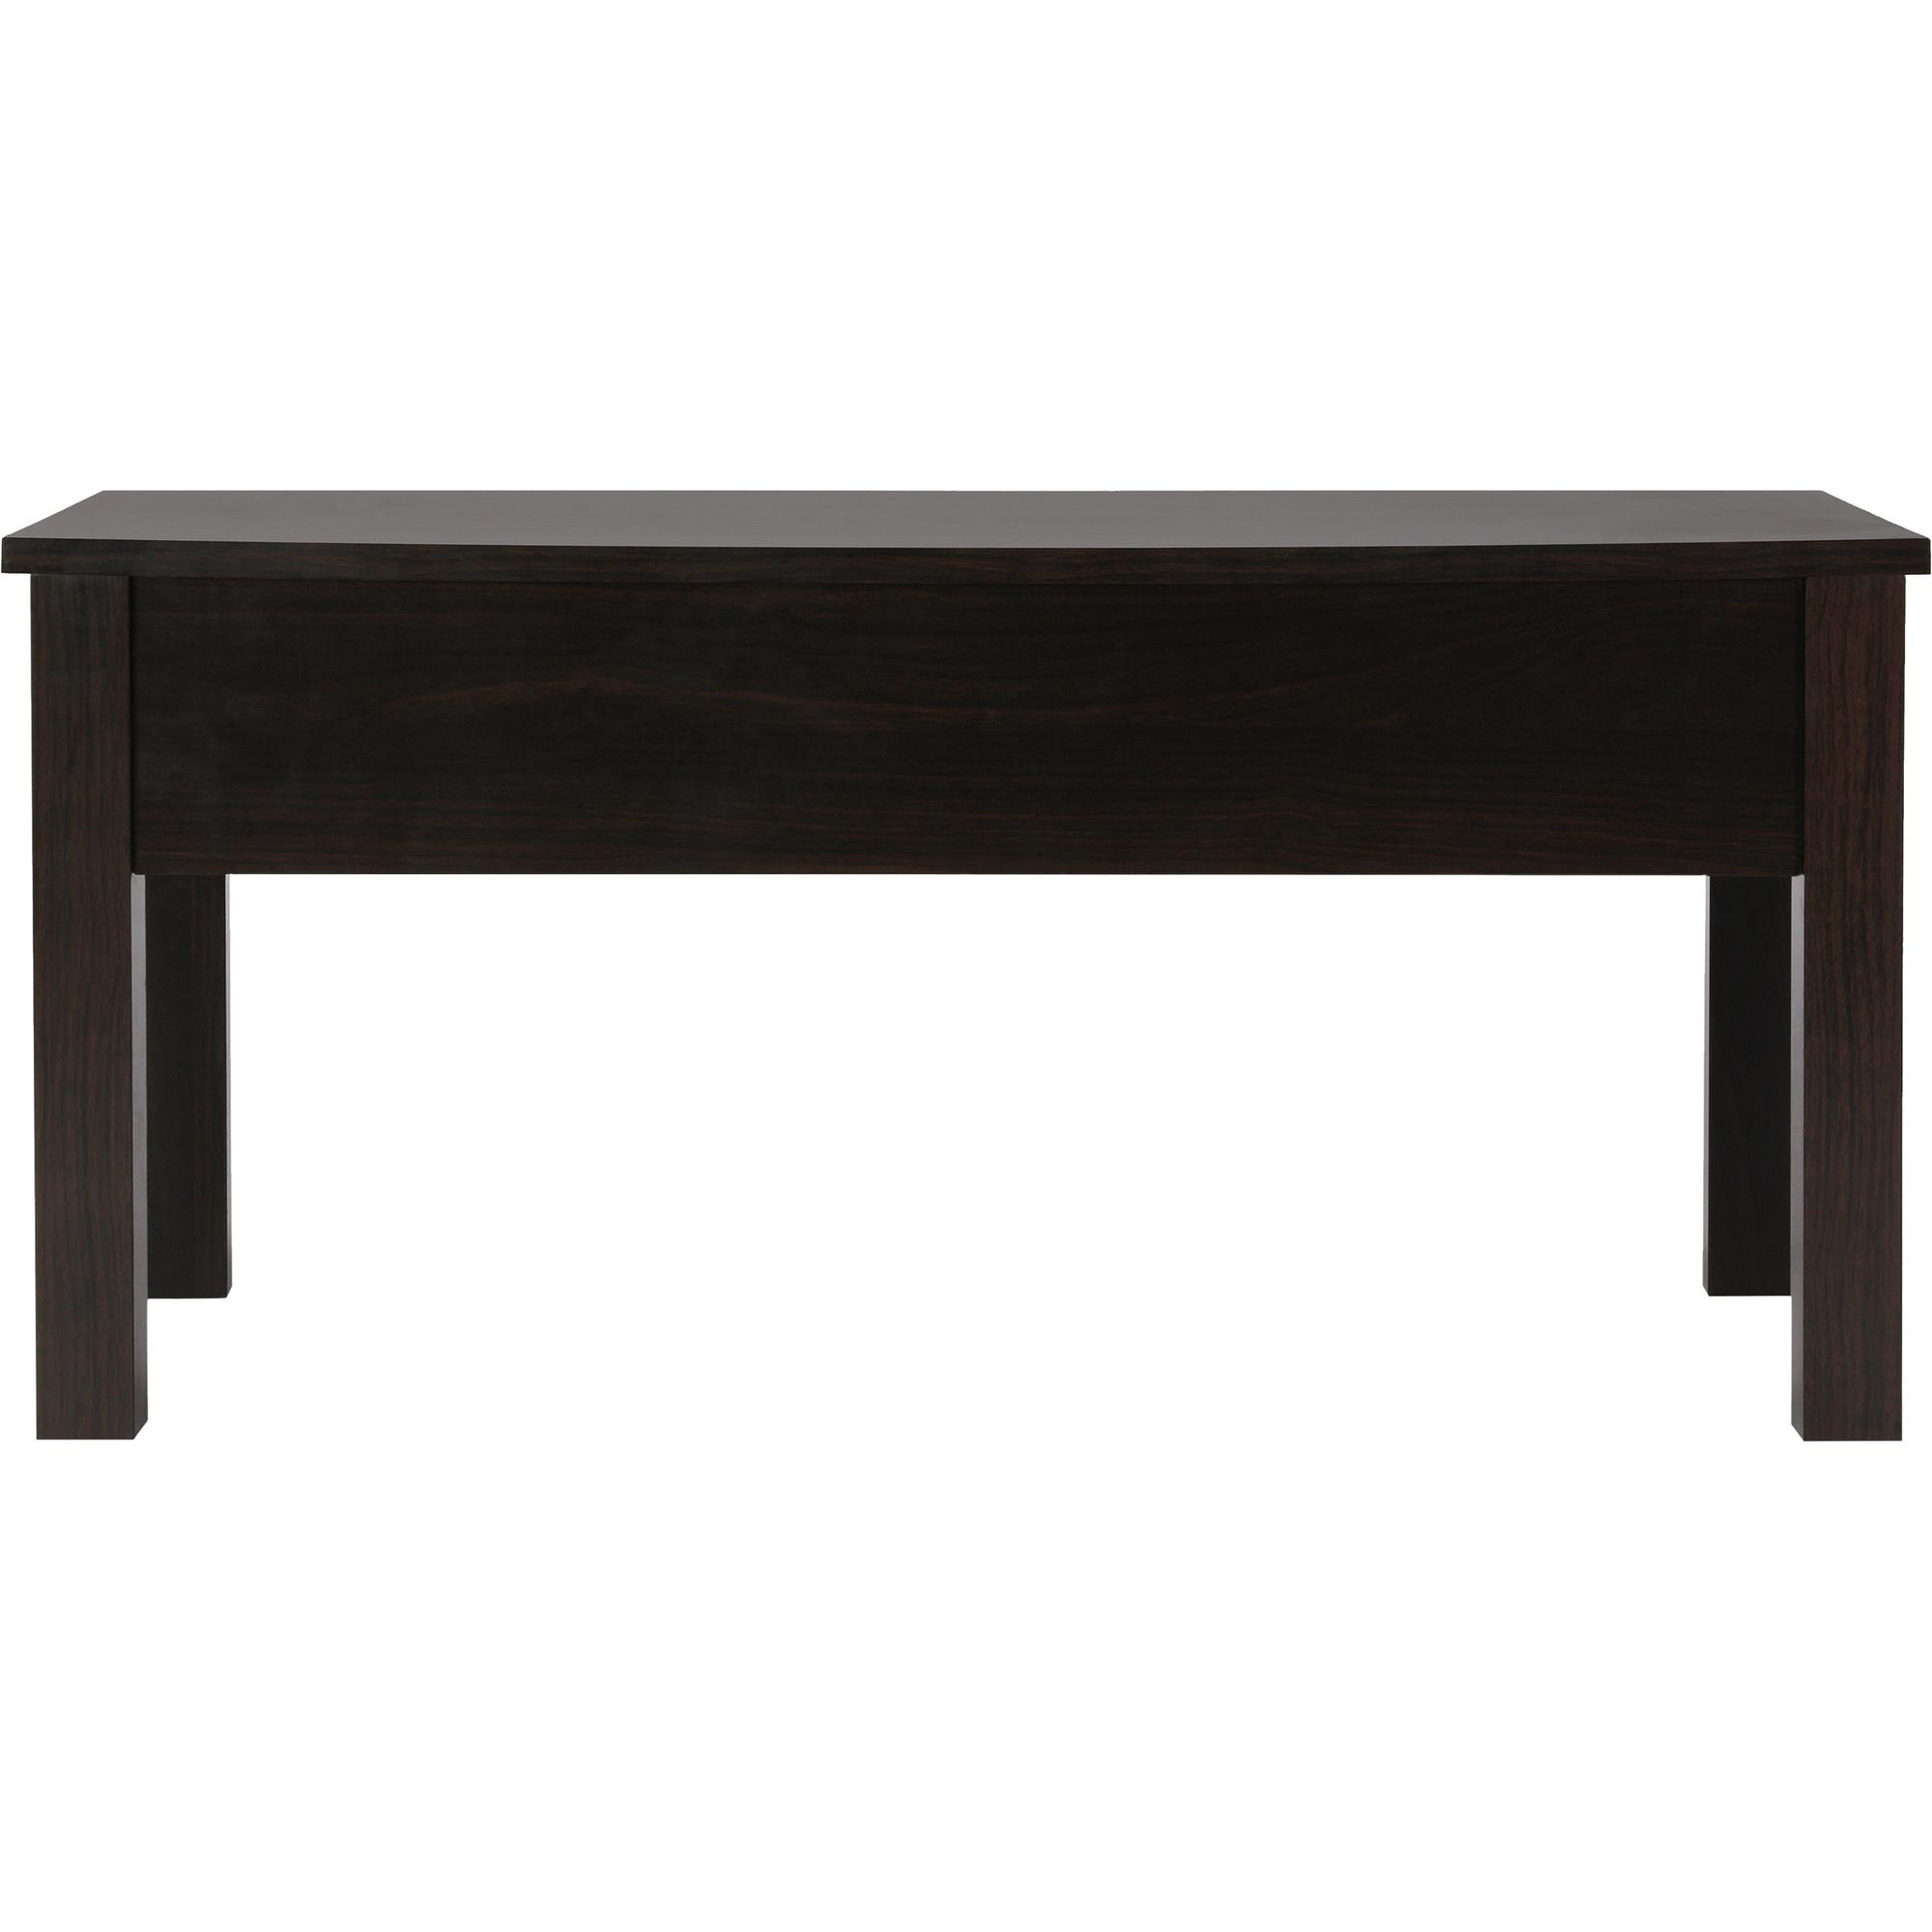 Mainstays Lift Top Coffee Table, Espresso - image 4 of 14